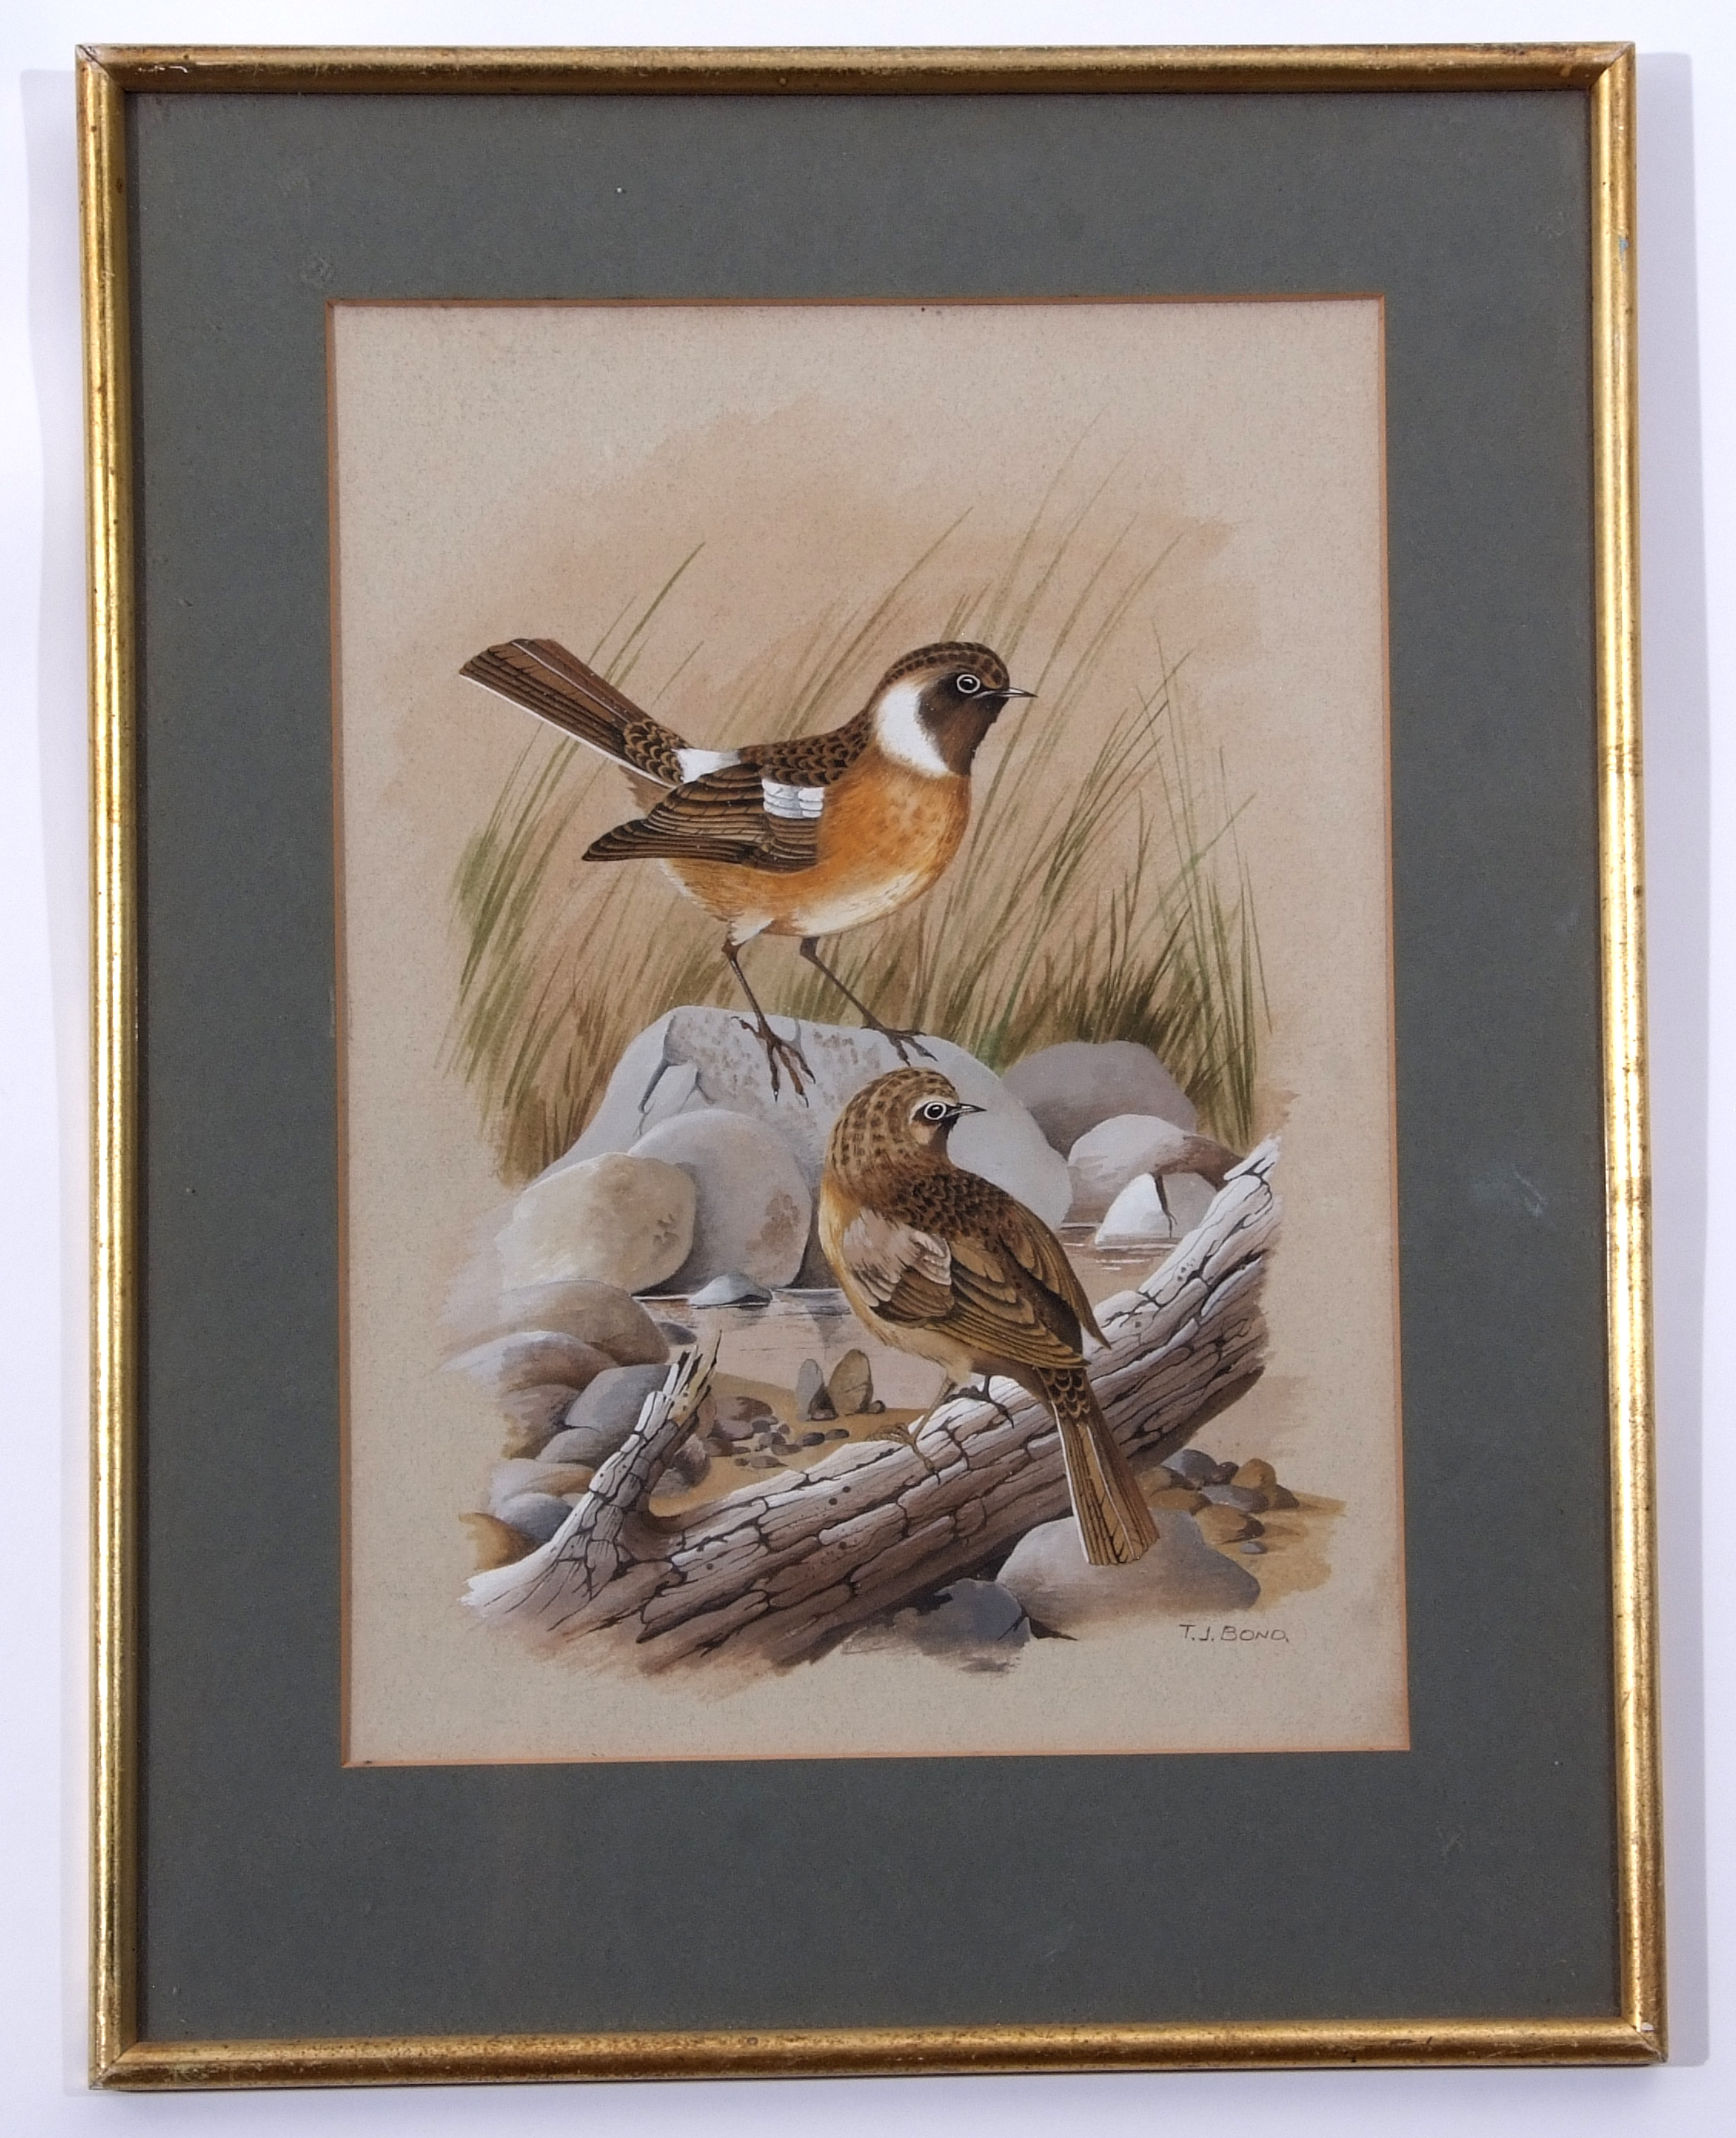 AR Terence J Bond (born 1946), "Stonechats", watercolour, signed lower right, 29 x 21cm - Image 2 of 2